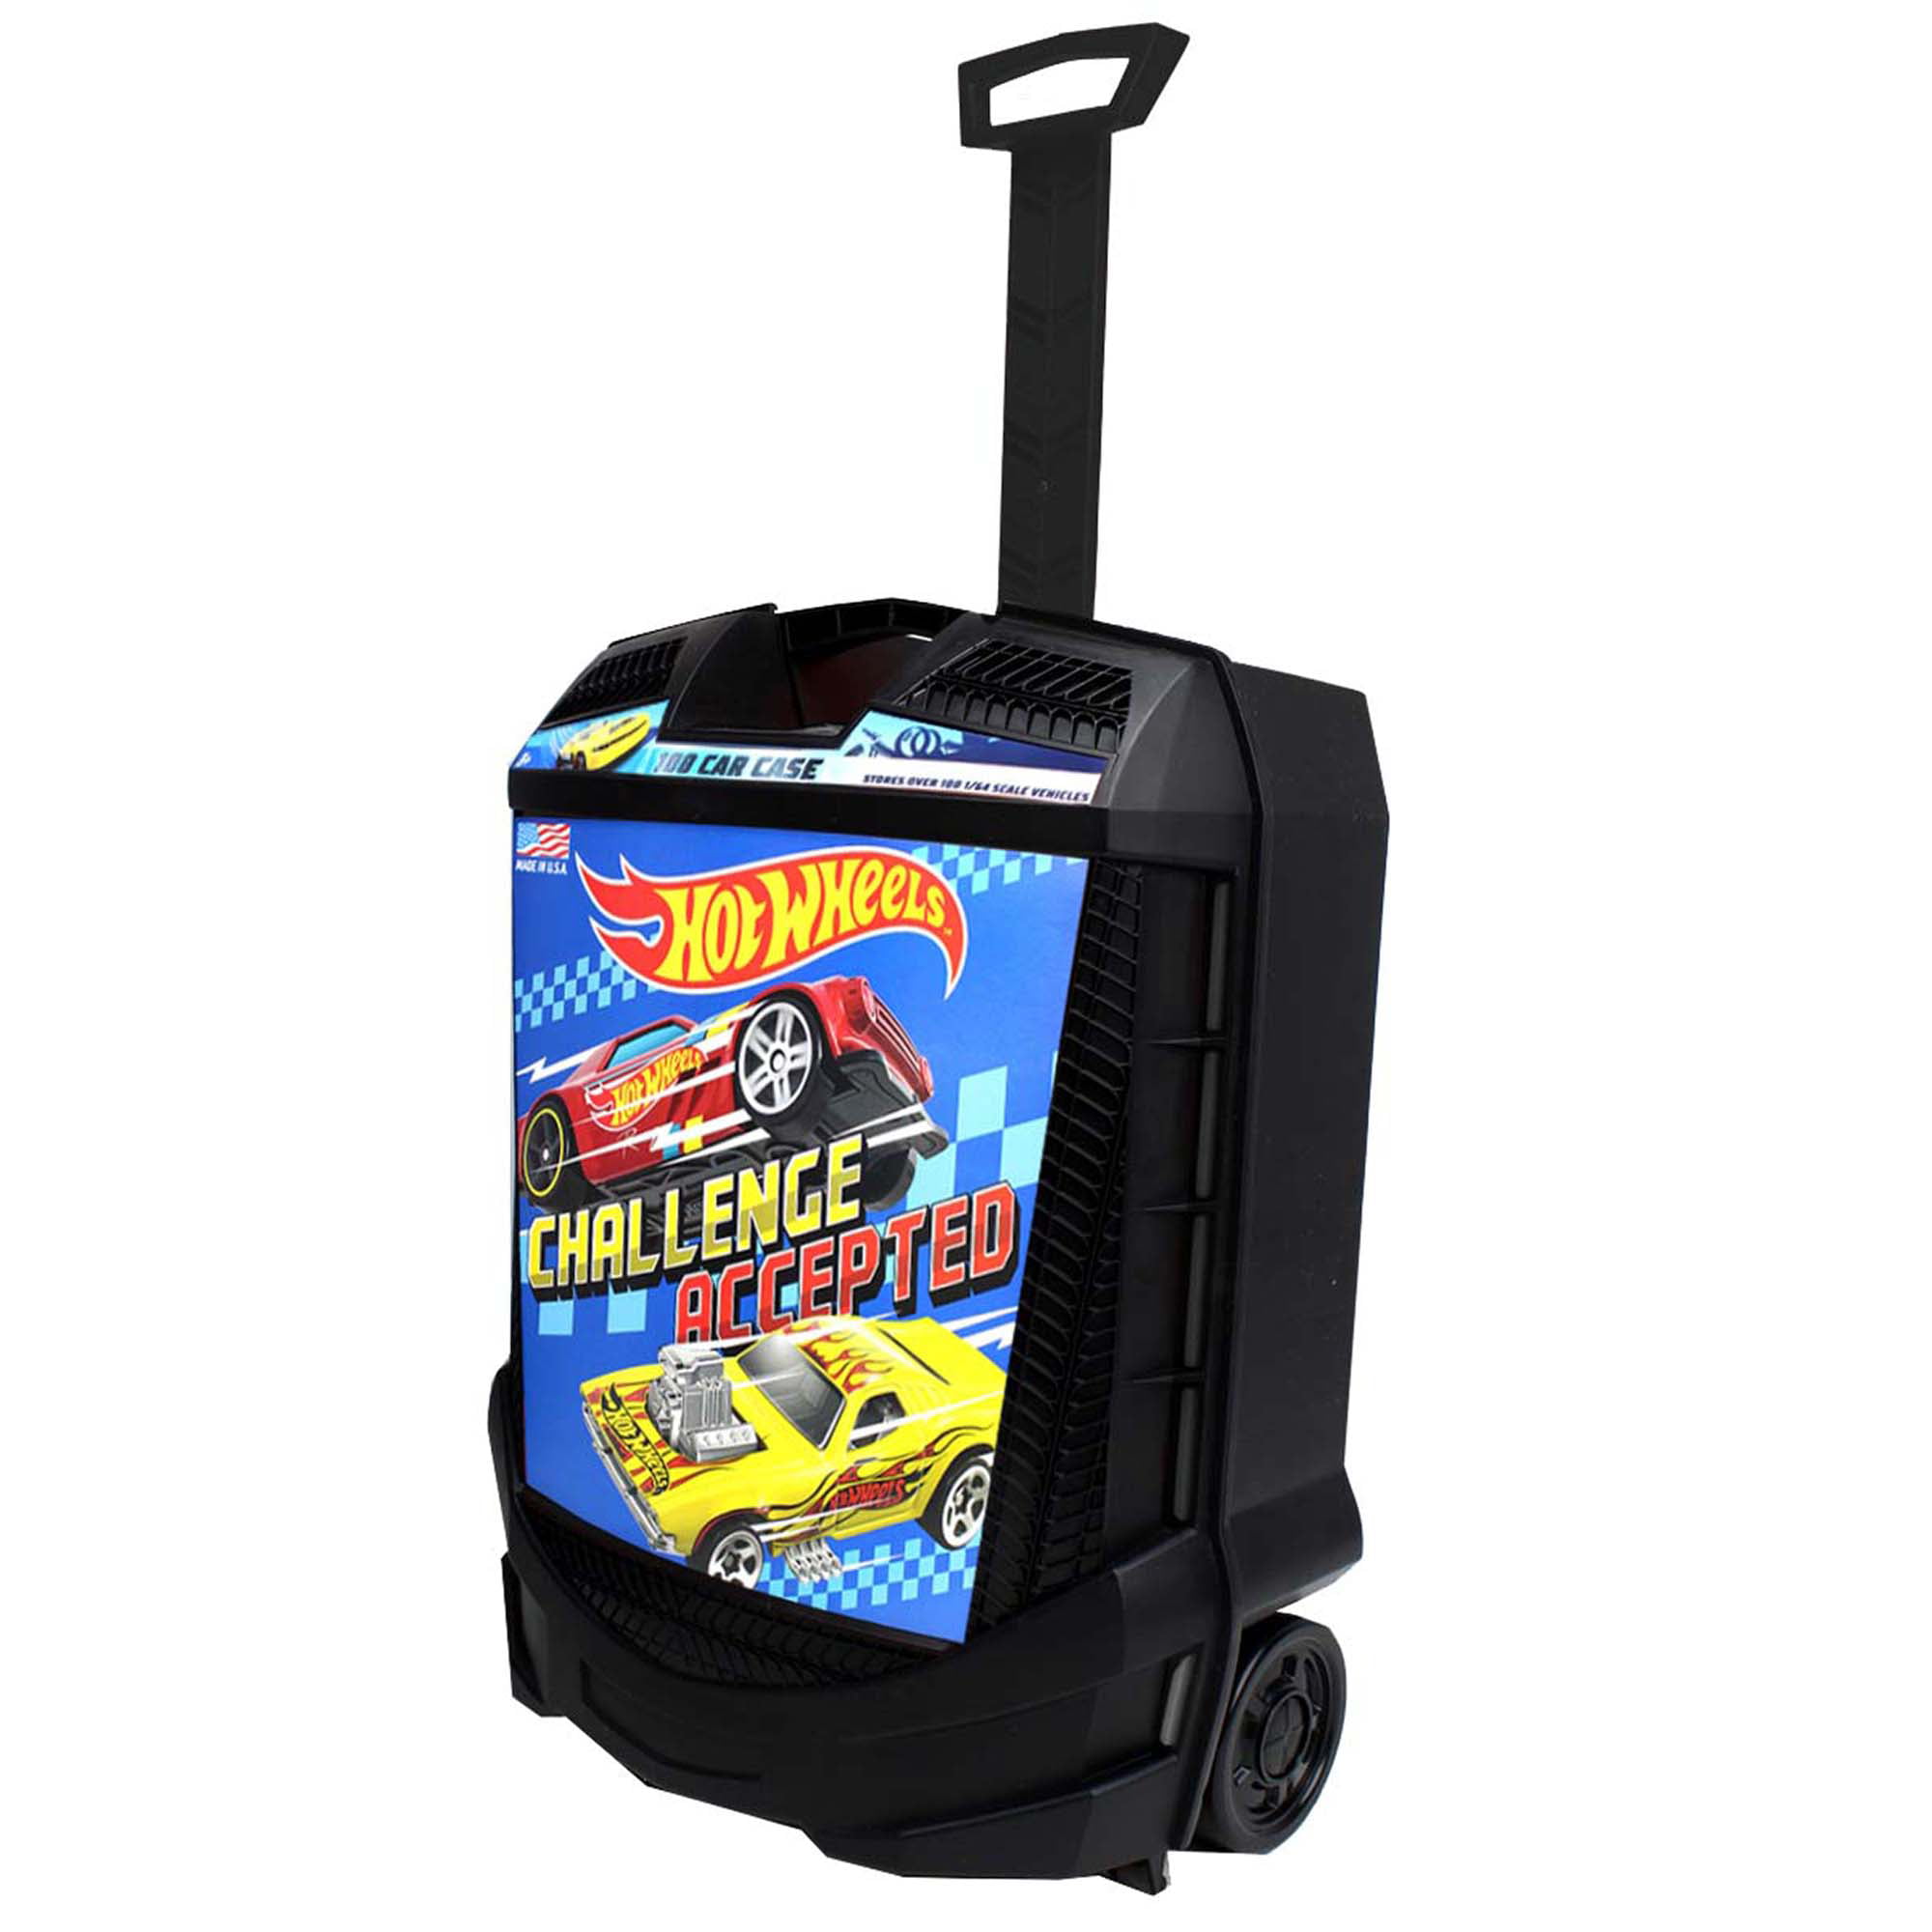 Hot Wheels 100 Cars with Carry Case Storage 20135 for sale online 